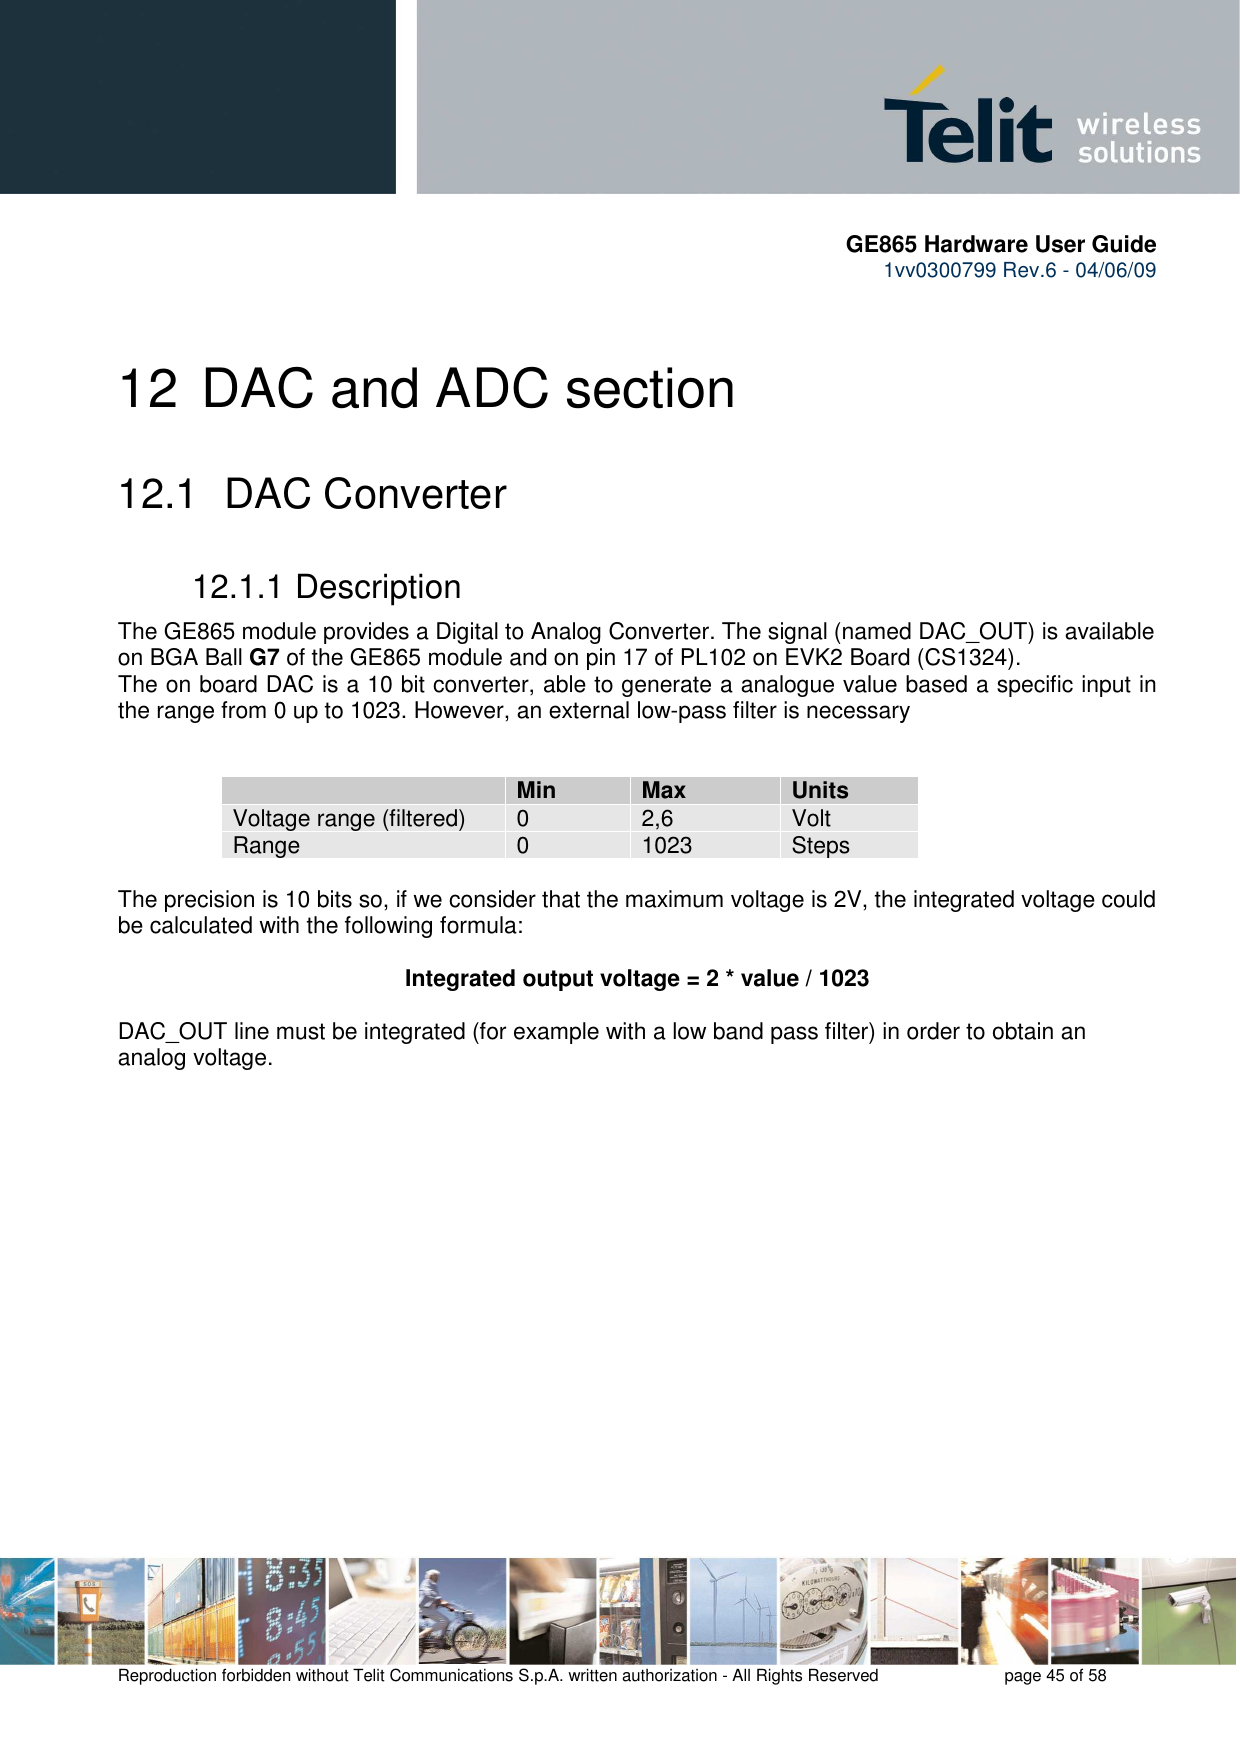       GE865 Hardware User Guide 1vv0300799 Rev.6 - 04/06/09      Reproduction forbidden without Telit Communications S.p.A. written authorization - All Rights Reserved    page 45 of 58  12 DAC and ADC section 12.1   DAC Converter 12.1.1 Description The GE865 module provides a Digital to Analog Converter. The signal (named DAC_OUT) is available on BGA Ball G7 of the GE865 module and on pin 17 of PL102 on EVK2 Board (CS1324). The on board DAC is a 10 bit converter, able to generate a analogue value based a specific input in the range from 0 up to 1023. However, an external low-pass filter is necessary    Min Max Units Voltage range (filtered)  0  2,6  Volt Range  0  1023  Steps  The precision is 10 bits so, if we consider that the maximum voltage is 2V, the integrated voltage could be calculated with the following formula:  Integrated output voltage = 2 * value / 1023  DAC_OUT line must be integrated (for example with a low band pass filter) in order to obtain an analog voltage. 